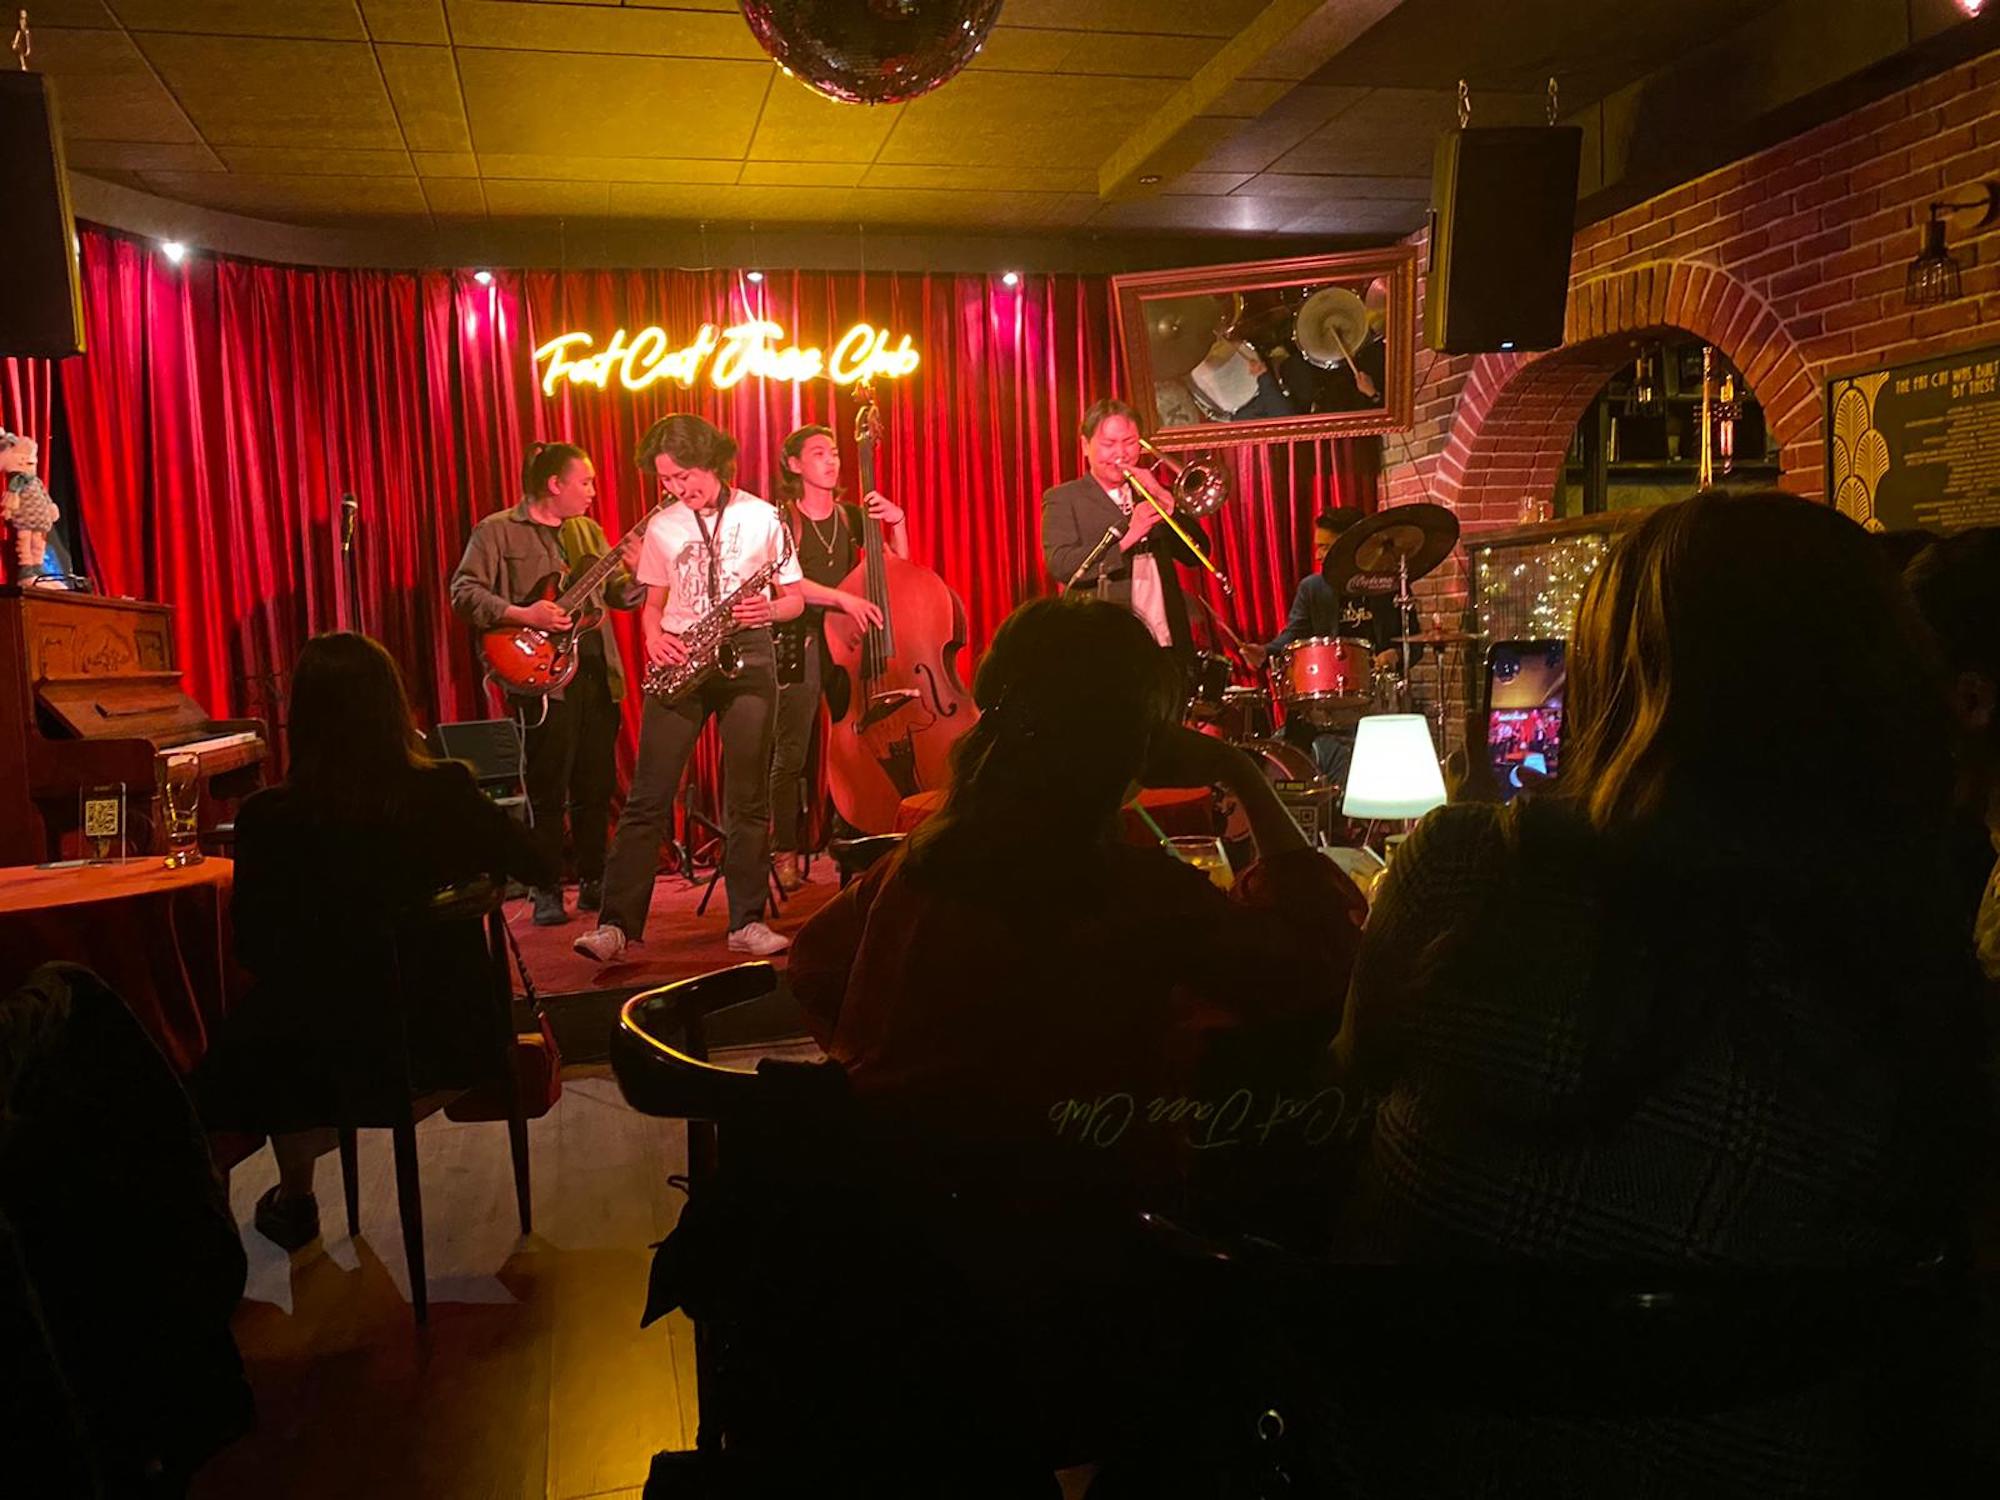 A jazz band plays at a small club in the capital of Mongolia